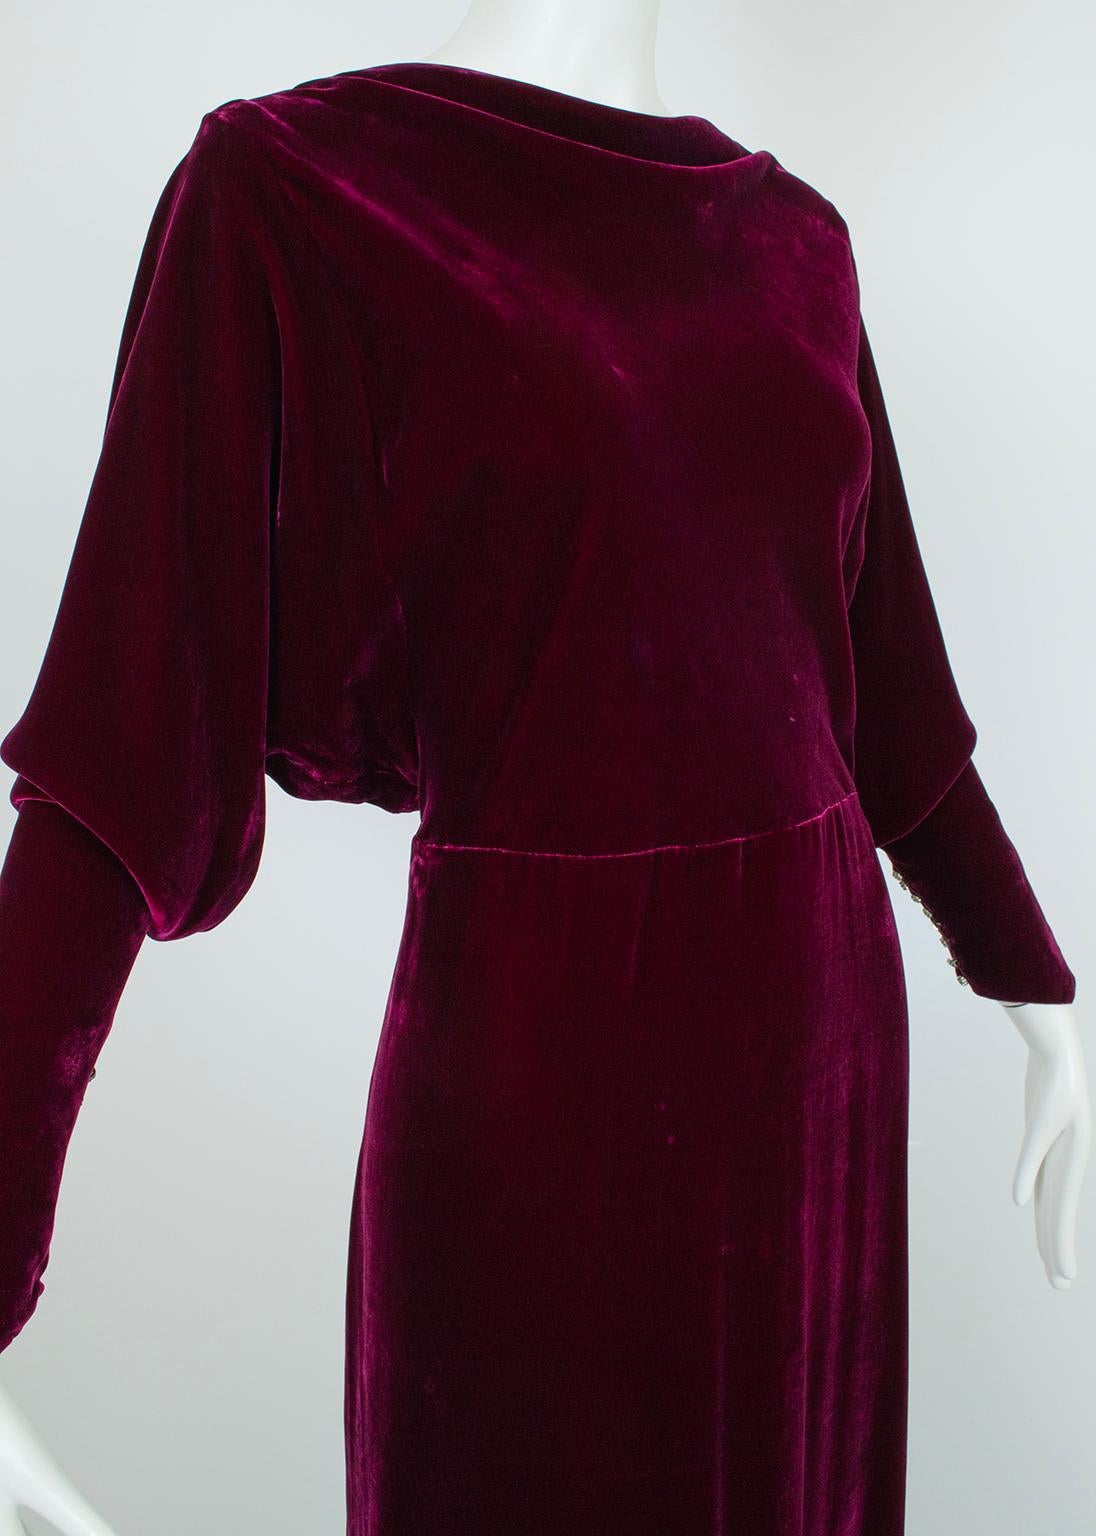 Regency Burgundy Silk Velvet Jeweled Cutout Back Bias Gown with Train – M, 1930s For Sale 3